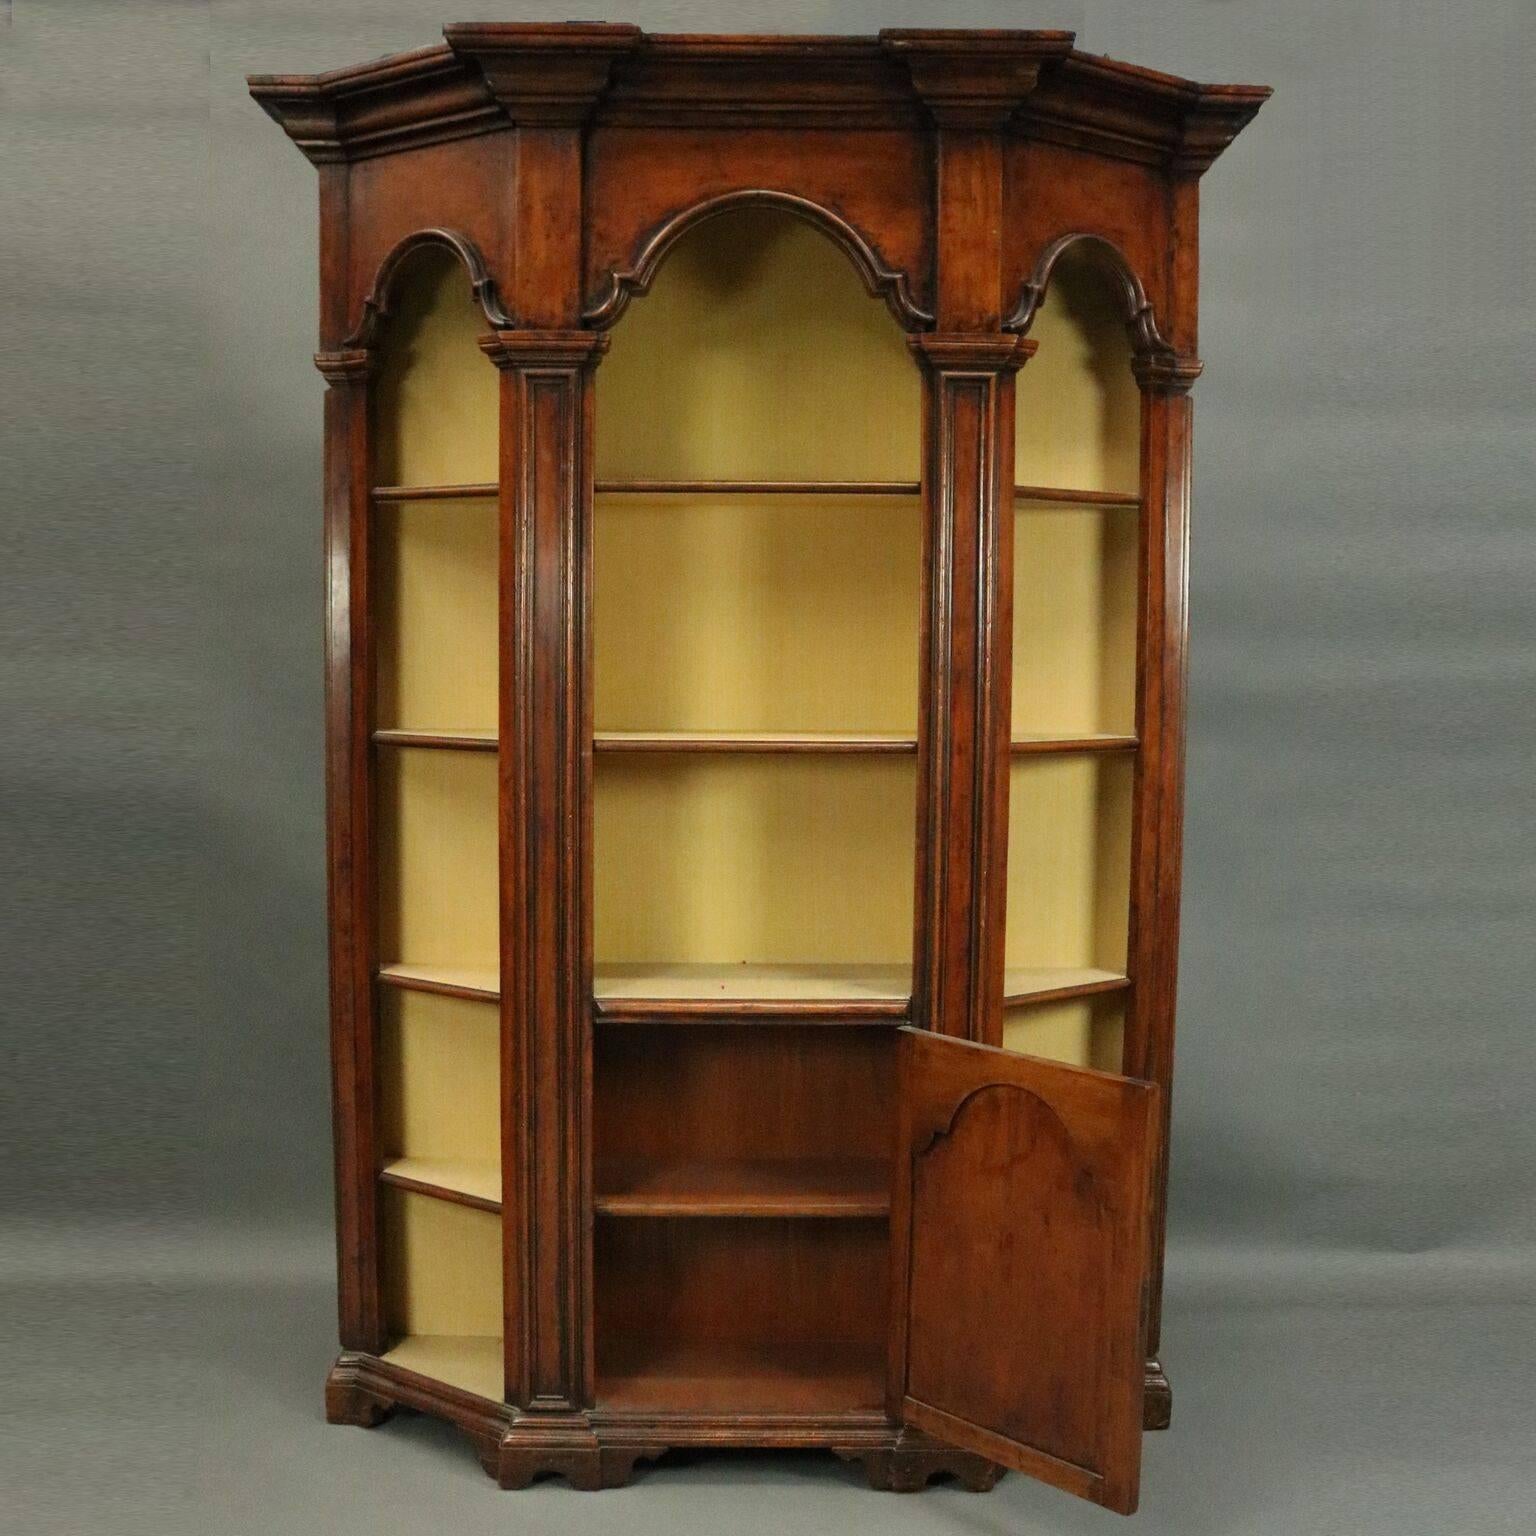 Antique architectural Italian mahogany faceted bookcase features three sides framed with columns and arched displays, five shelves on each side with two on the front behind a blind door, fabric lined, mid-20th century.

Measures - 88.5